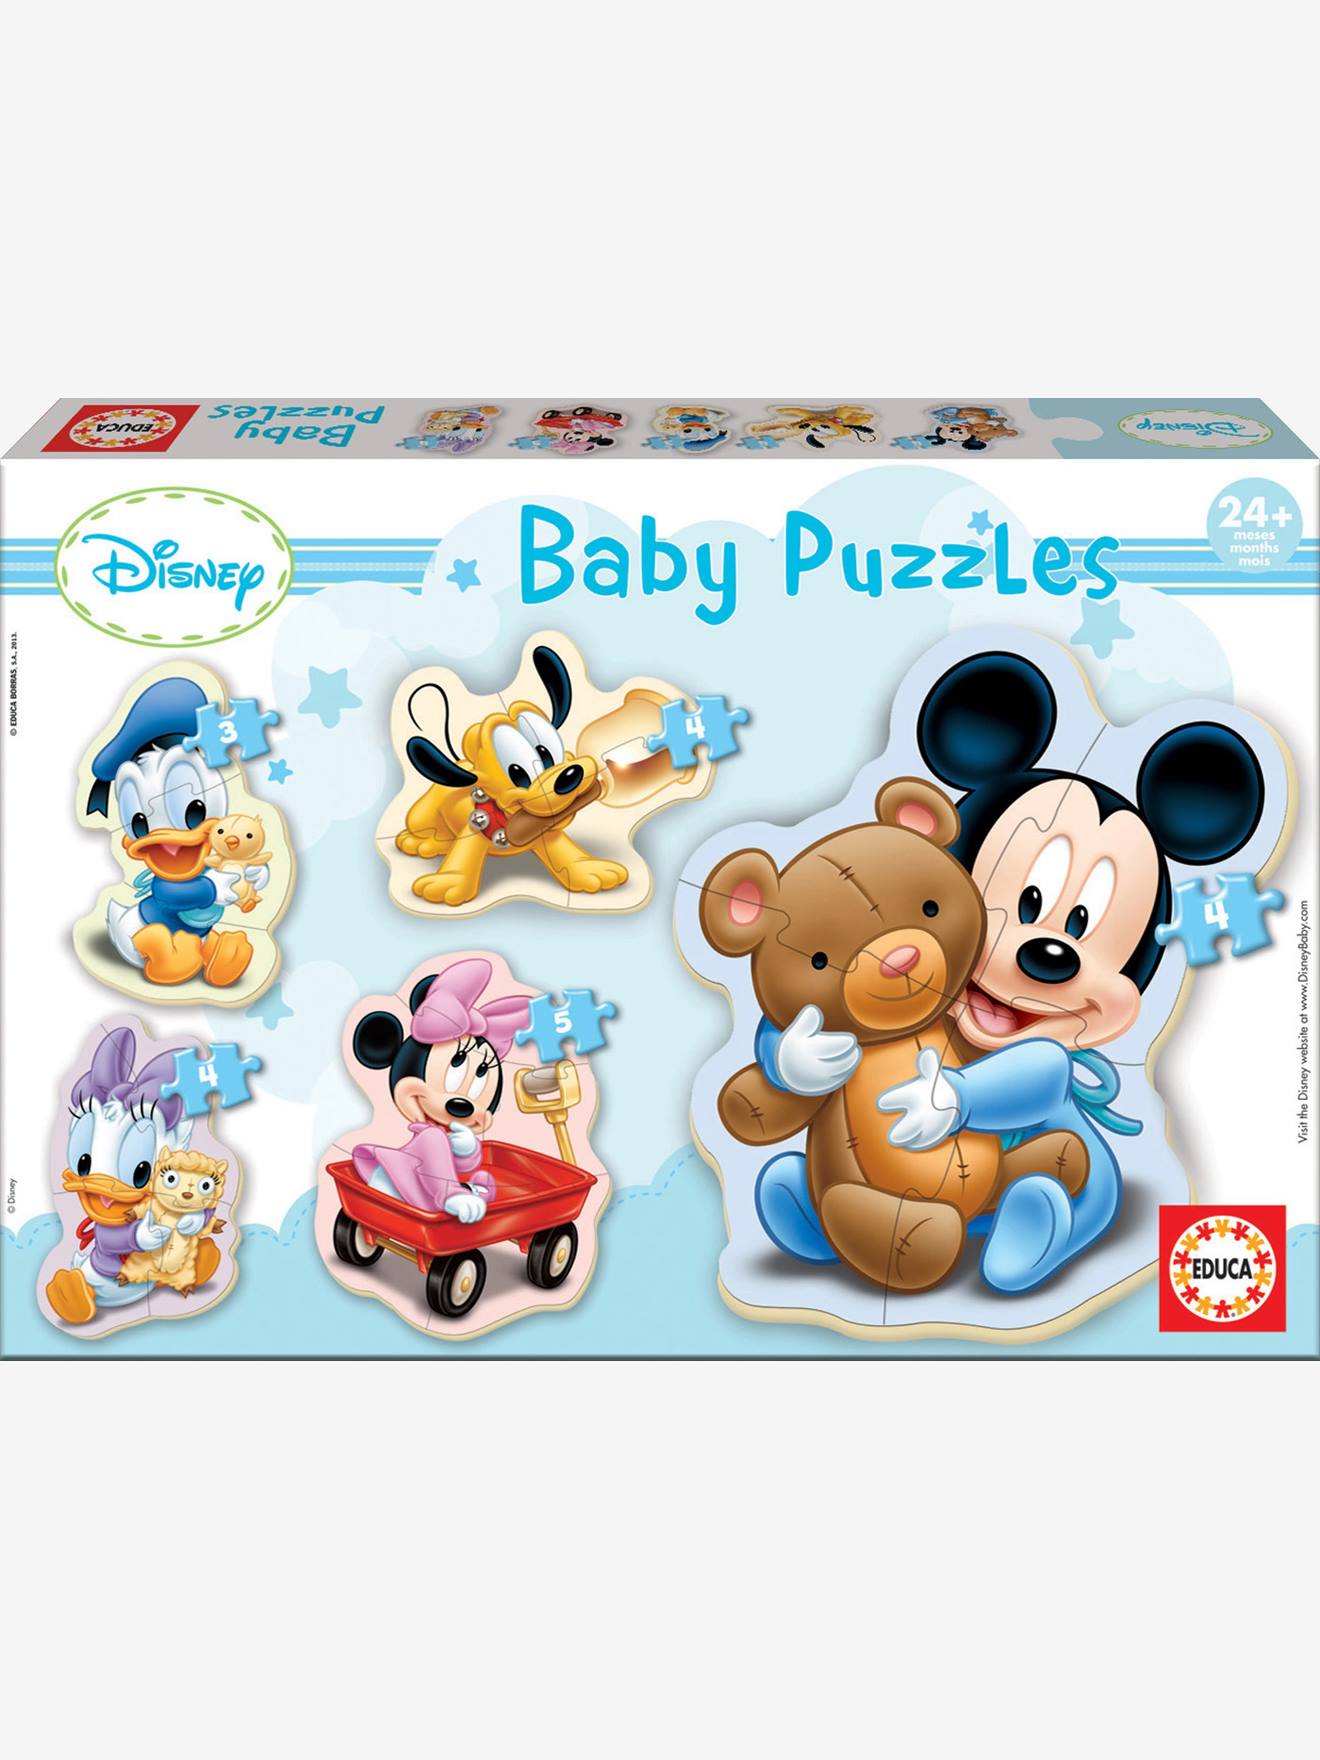 Set of 5 Progressive Puzzles, 3-5 Pieces, Disney(r) Mickey Mouse, by EDUCA light blue